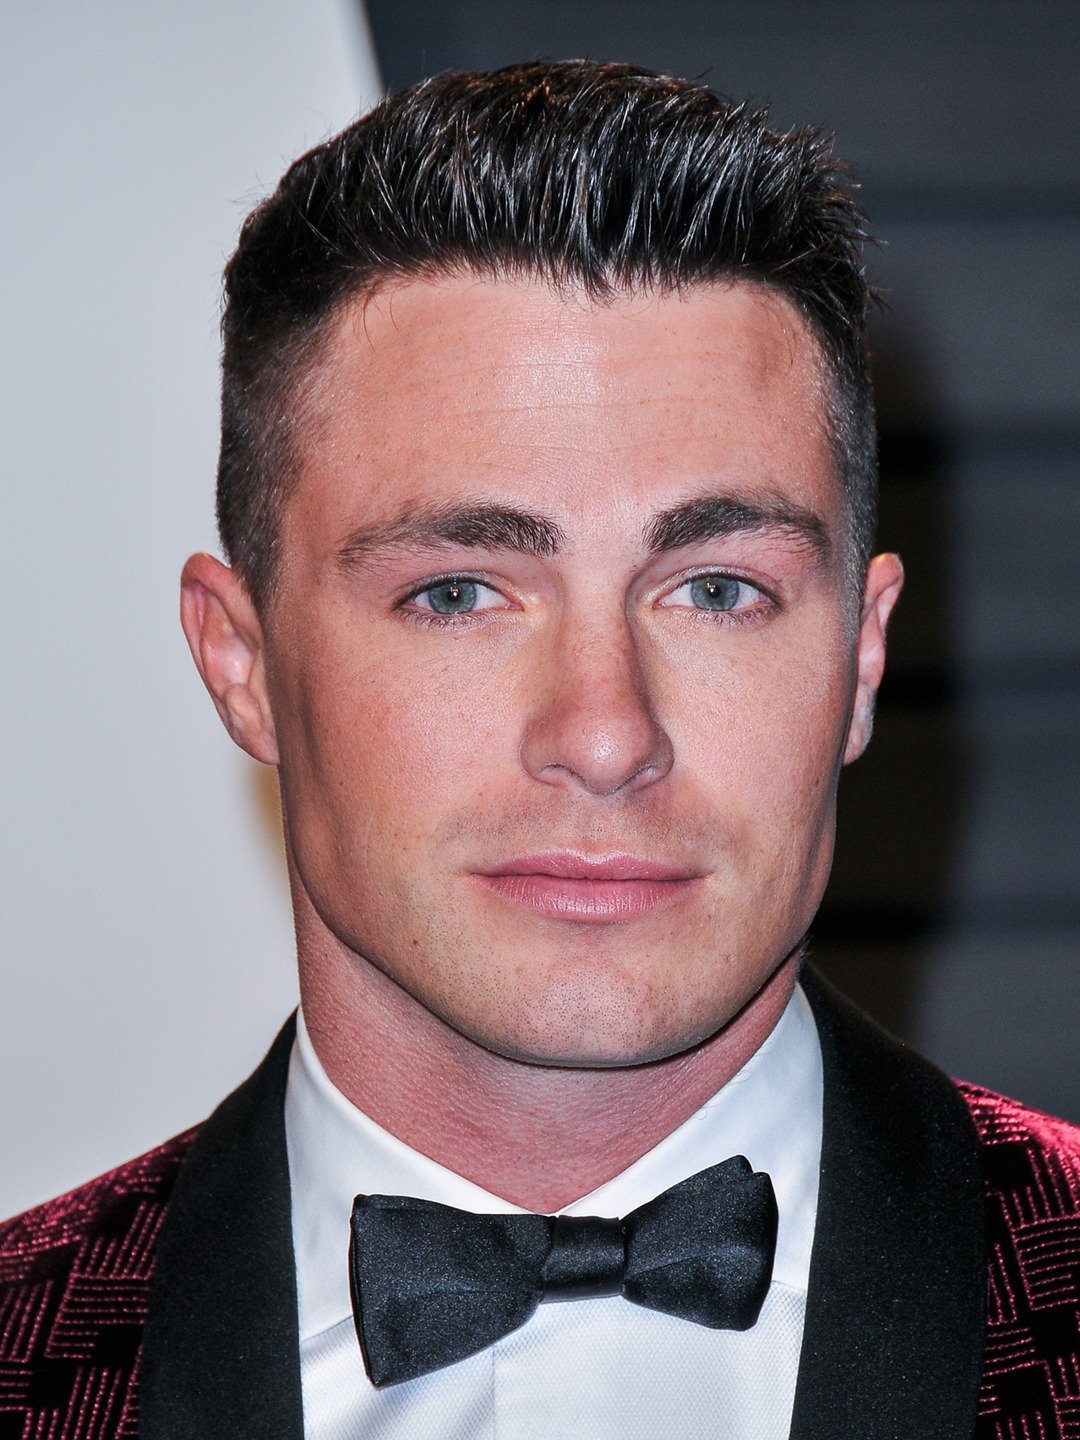 How tall is Colton Haynes?